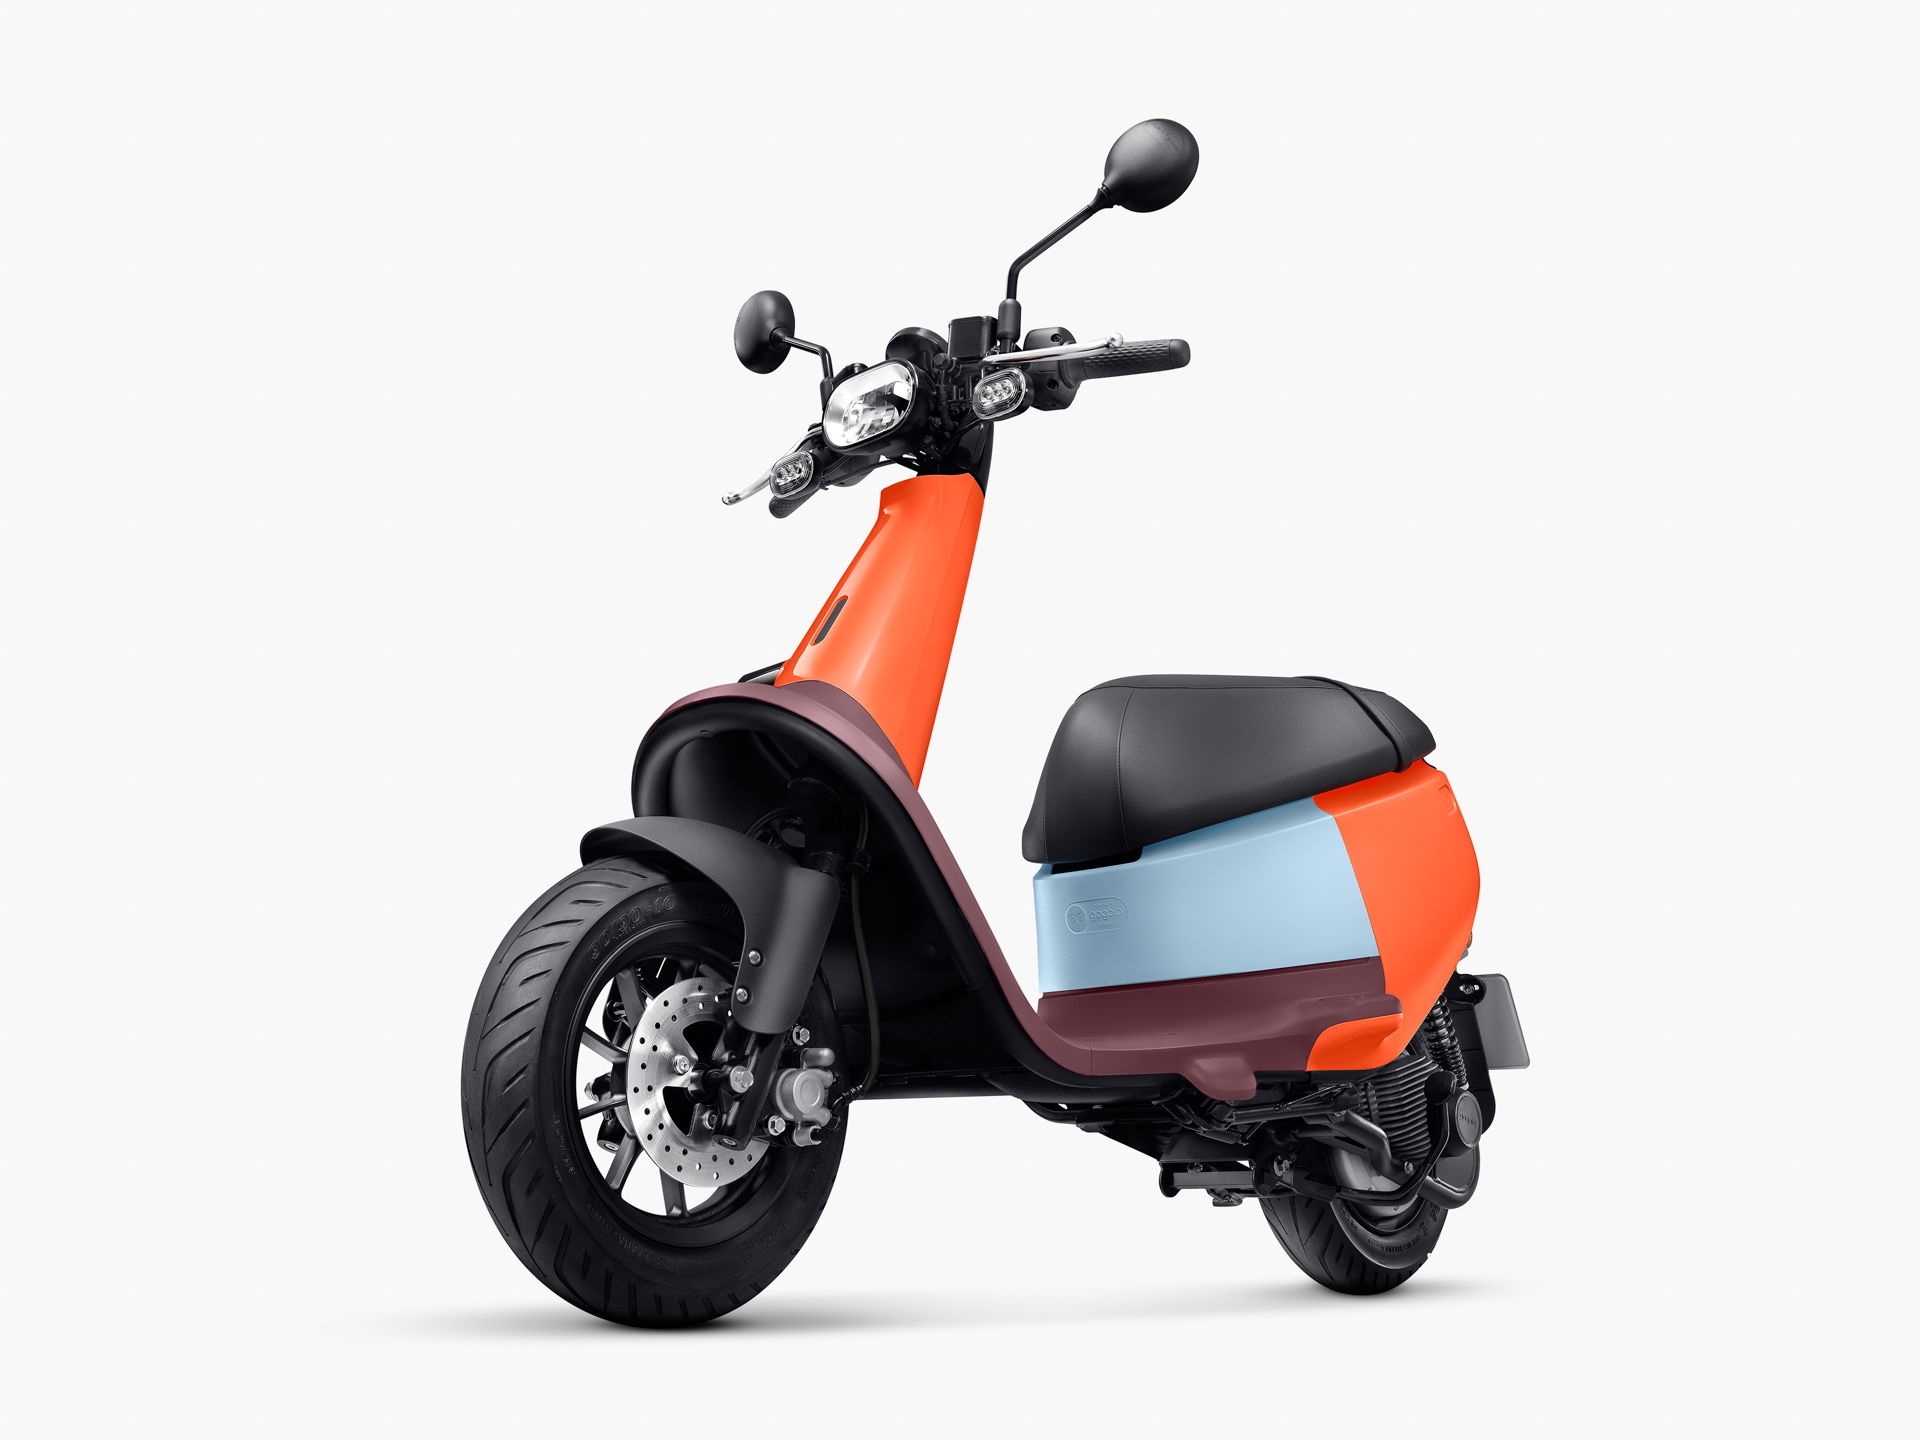 Gogoro’s smaller scooter is built for international expansion | DeviceDaily.com